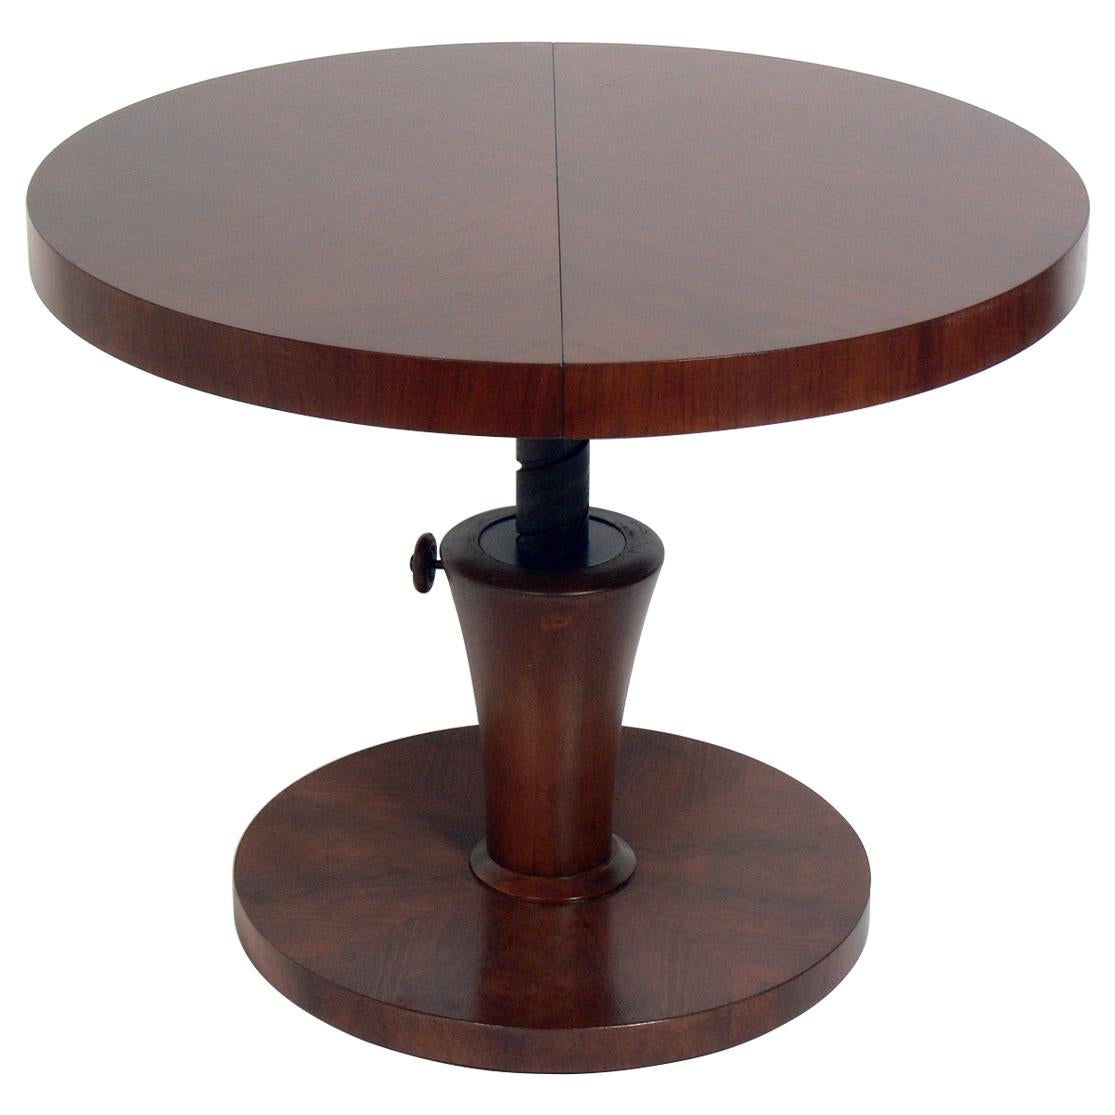 Danish Modern Convertible Coffee or Dining Table